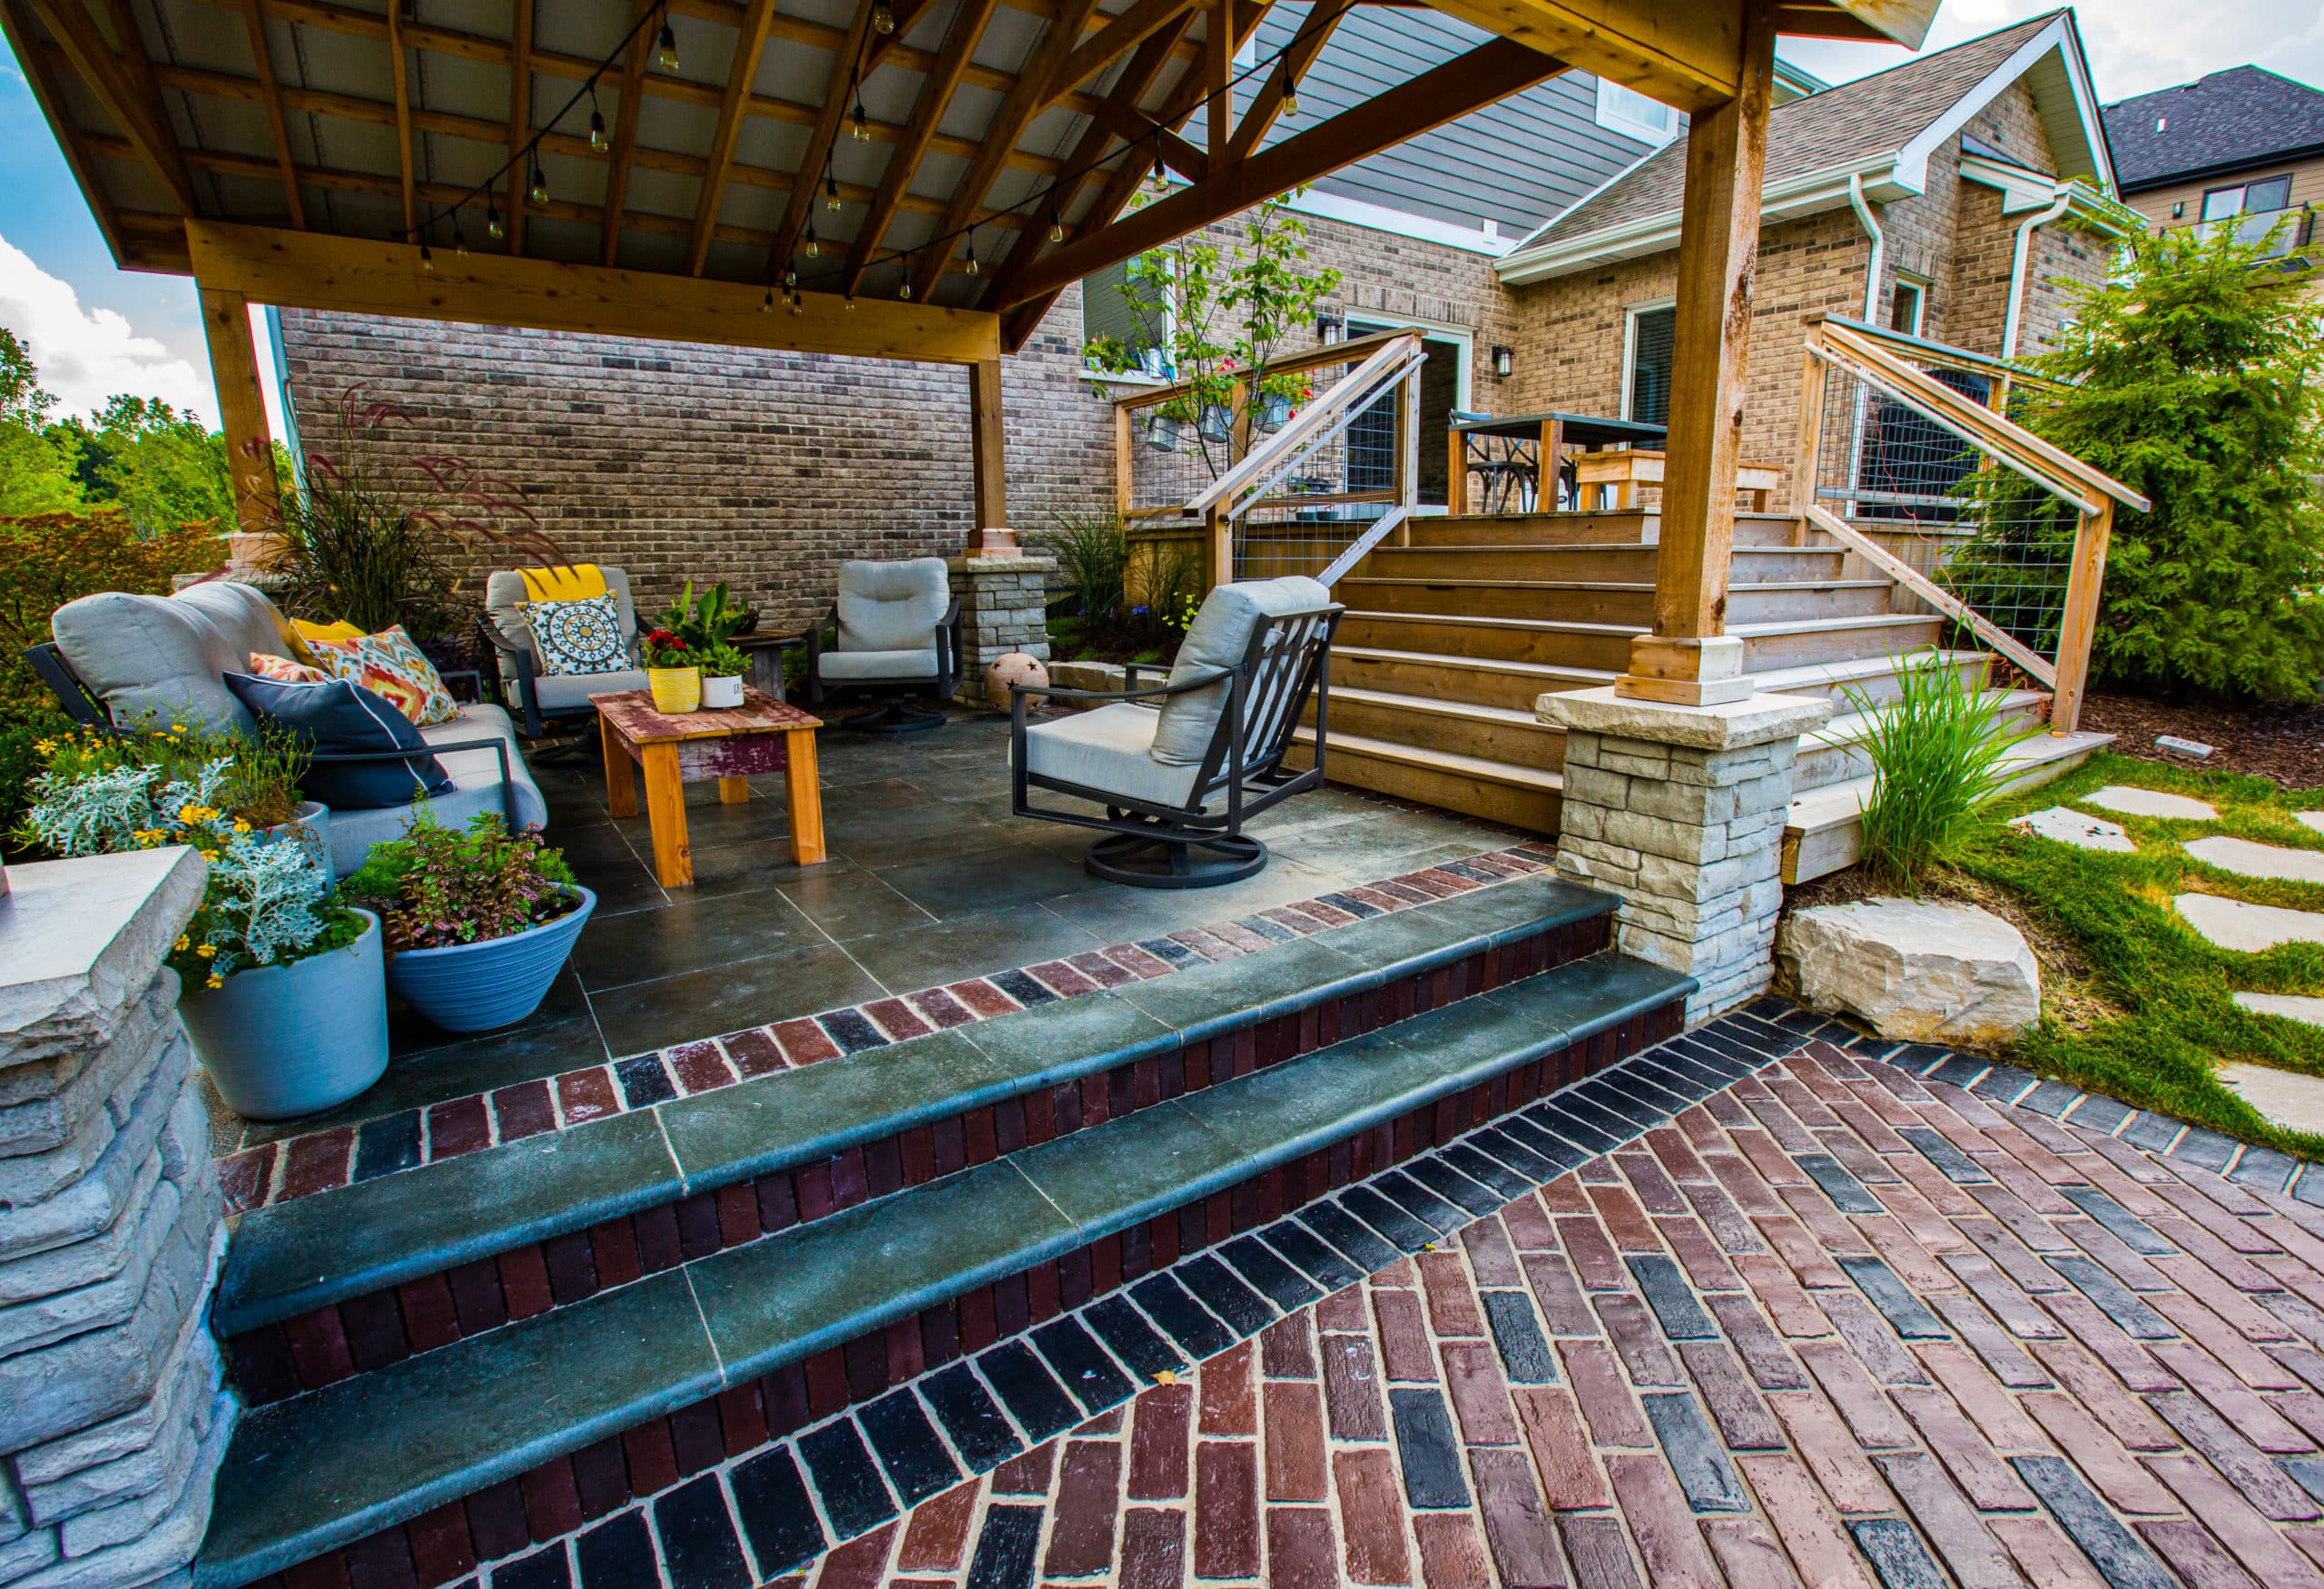 hardscape and patios in homer glen and naperville illinois with bret-mar landscaping.